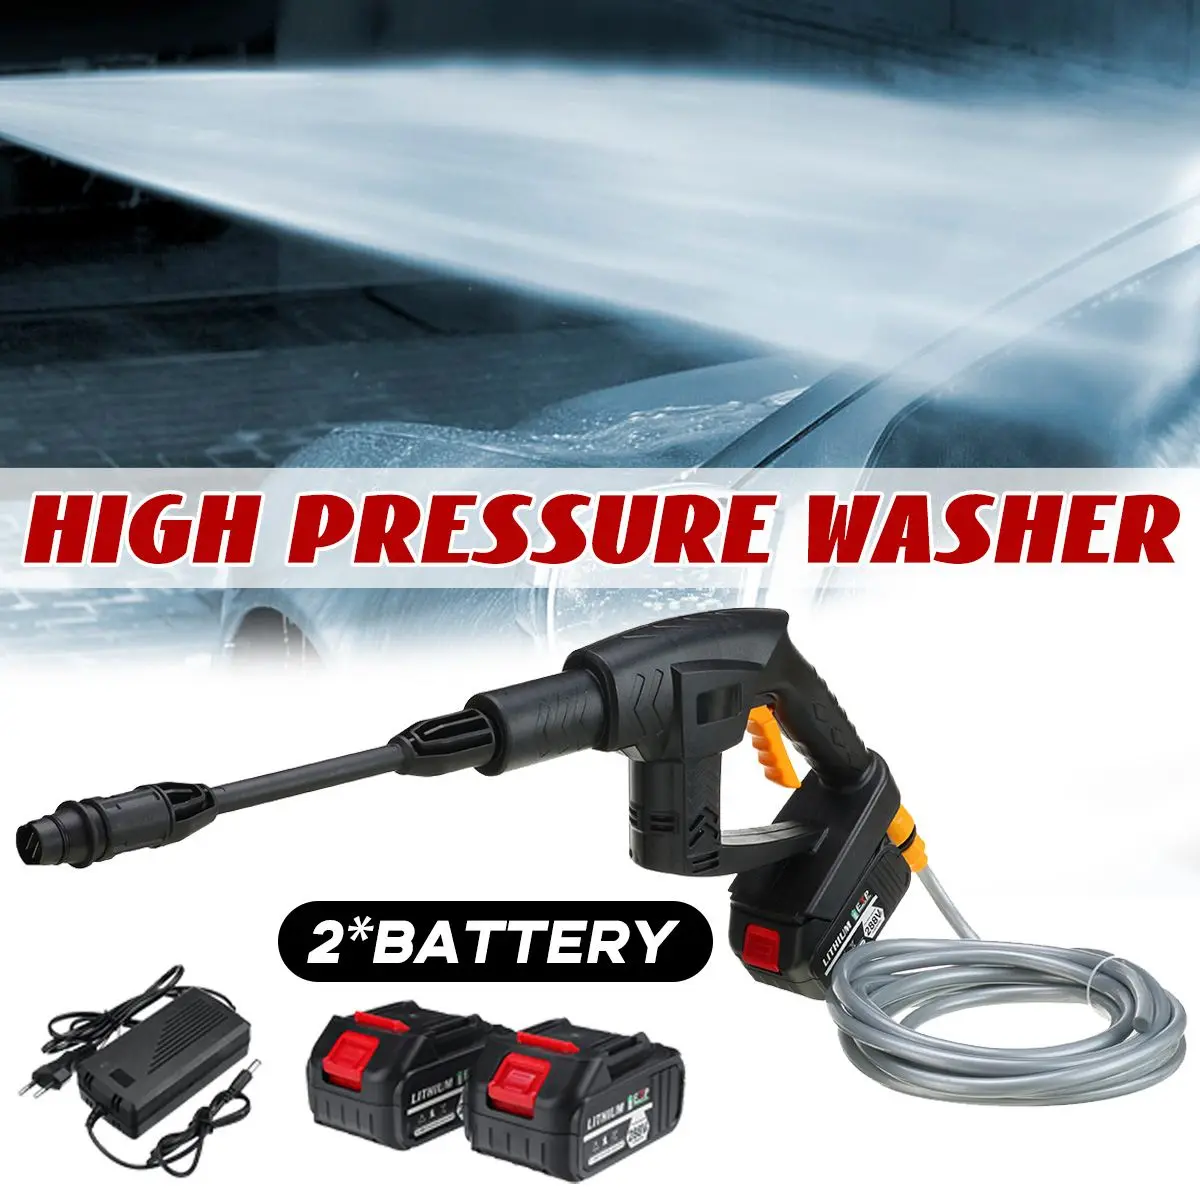 288VF High Pressure Car Washer Power 2 Battery Cordless Portable Handheld Pressure Nozzle Watering Cleaning Machine EU Plug